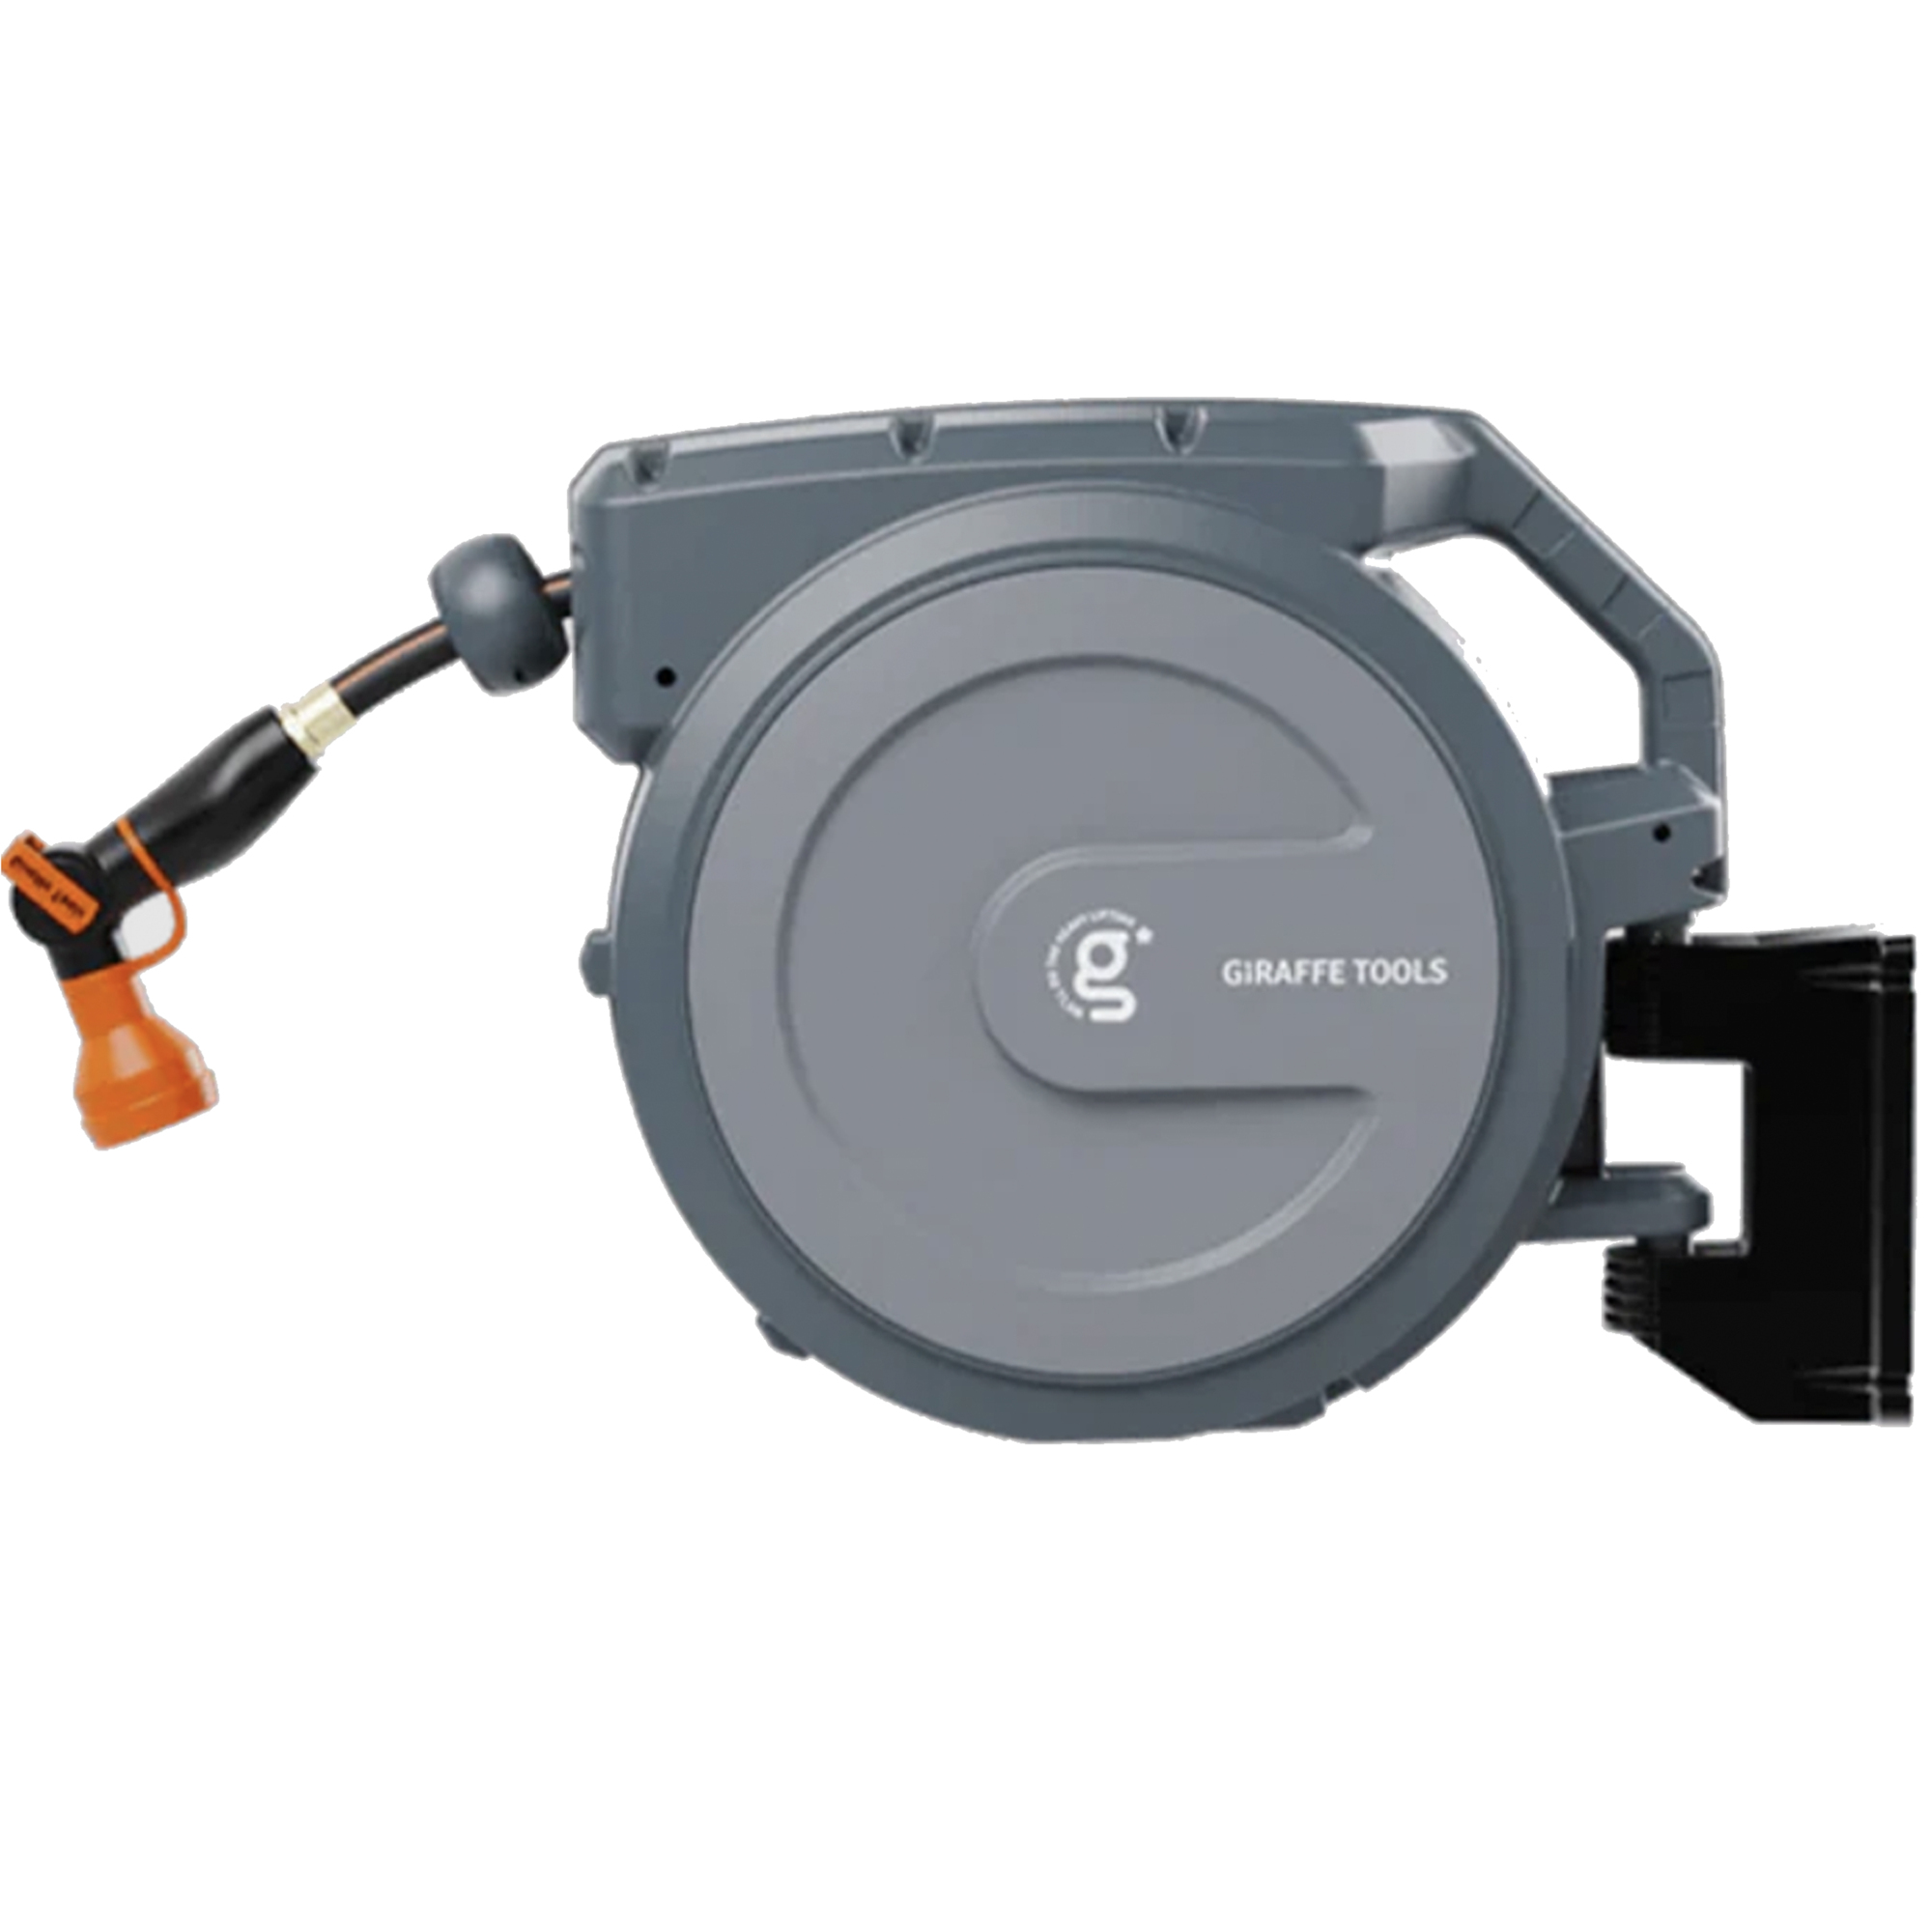 Strongway Garden Hose Reel with 5/8in. Dia. x 80ft.L Hose 